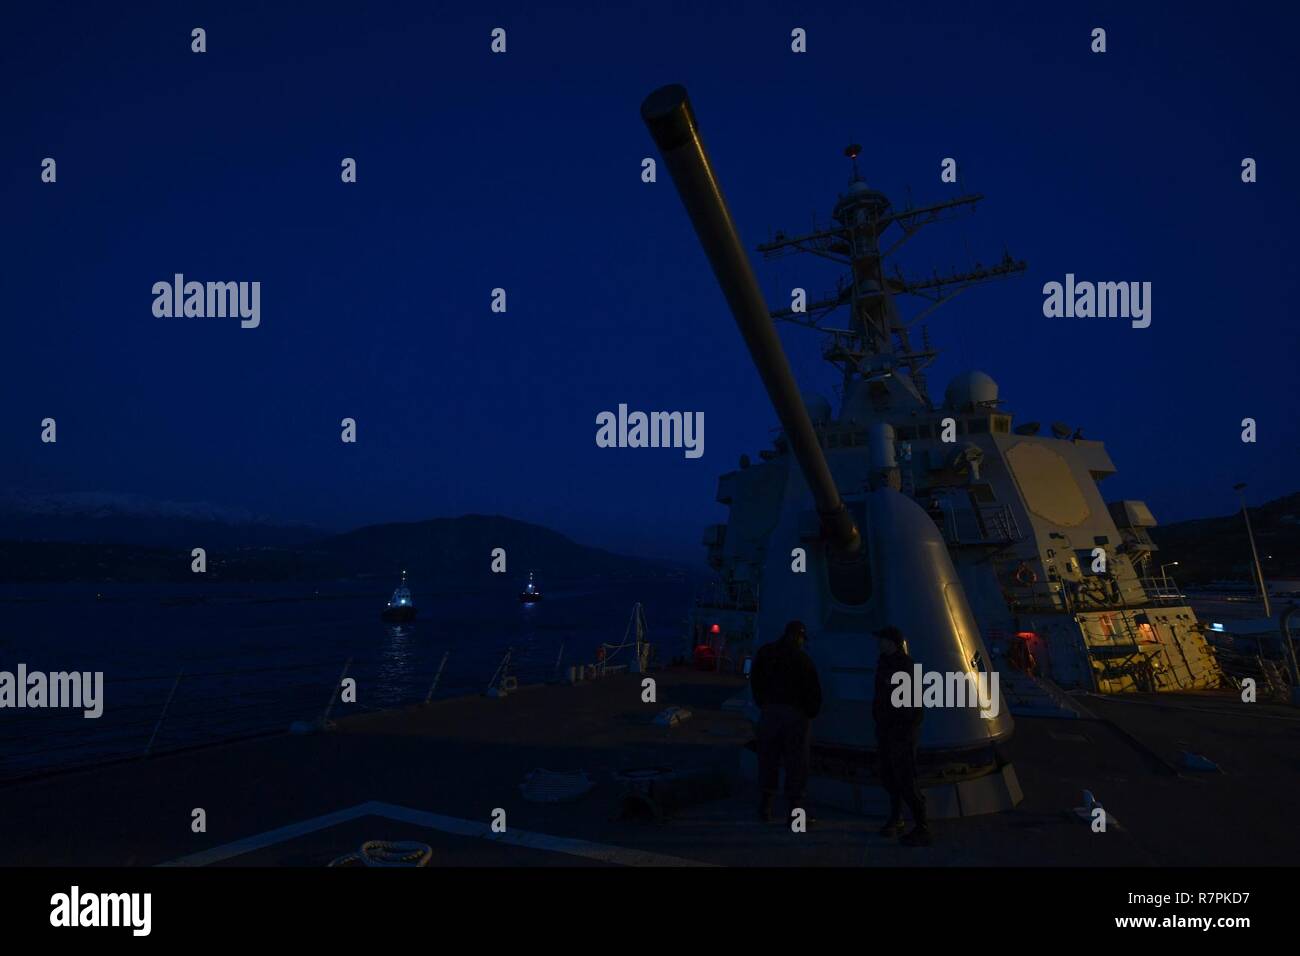 - SOUDA BAY, Greece (March 27, 2017) The guided-missile destroyer USS Porter (DDG 78) prepares to depart Souda Bay, Greece, March 27, 2017. Porter, forward-deployed to Rota, Spain, is conducting naval operations in the U.S. 6th Fleet area of operations in support of U.S. national security interests in Europe. Stock Photo